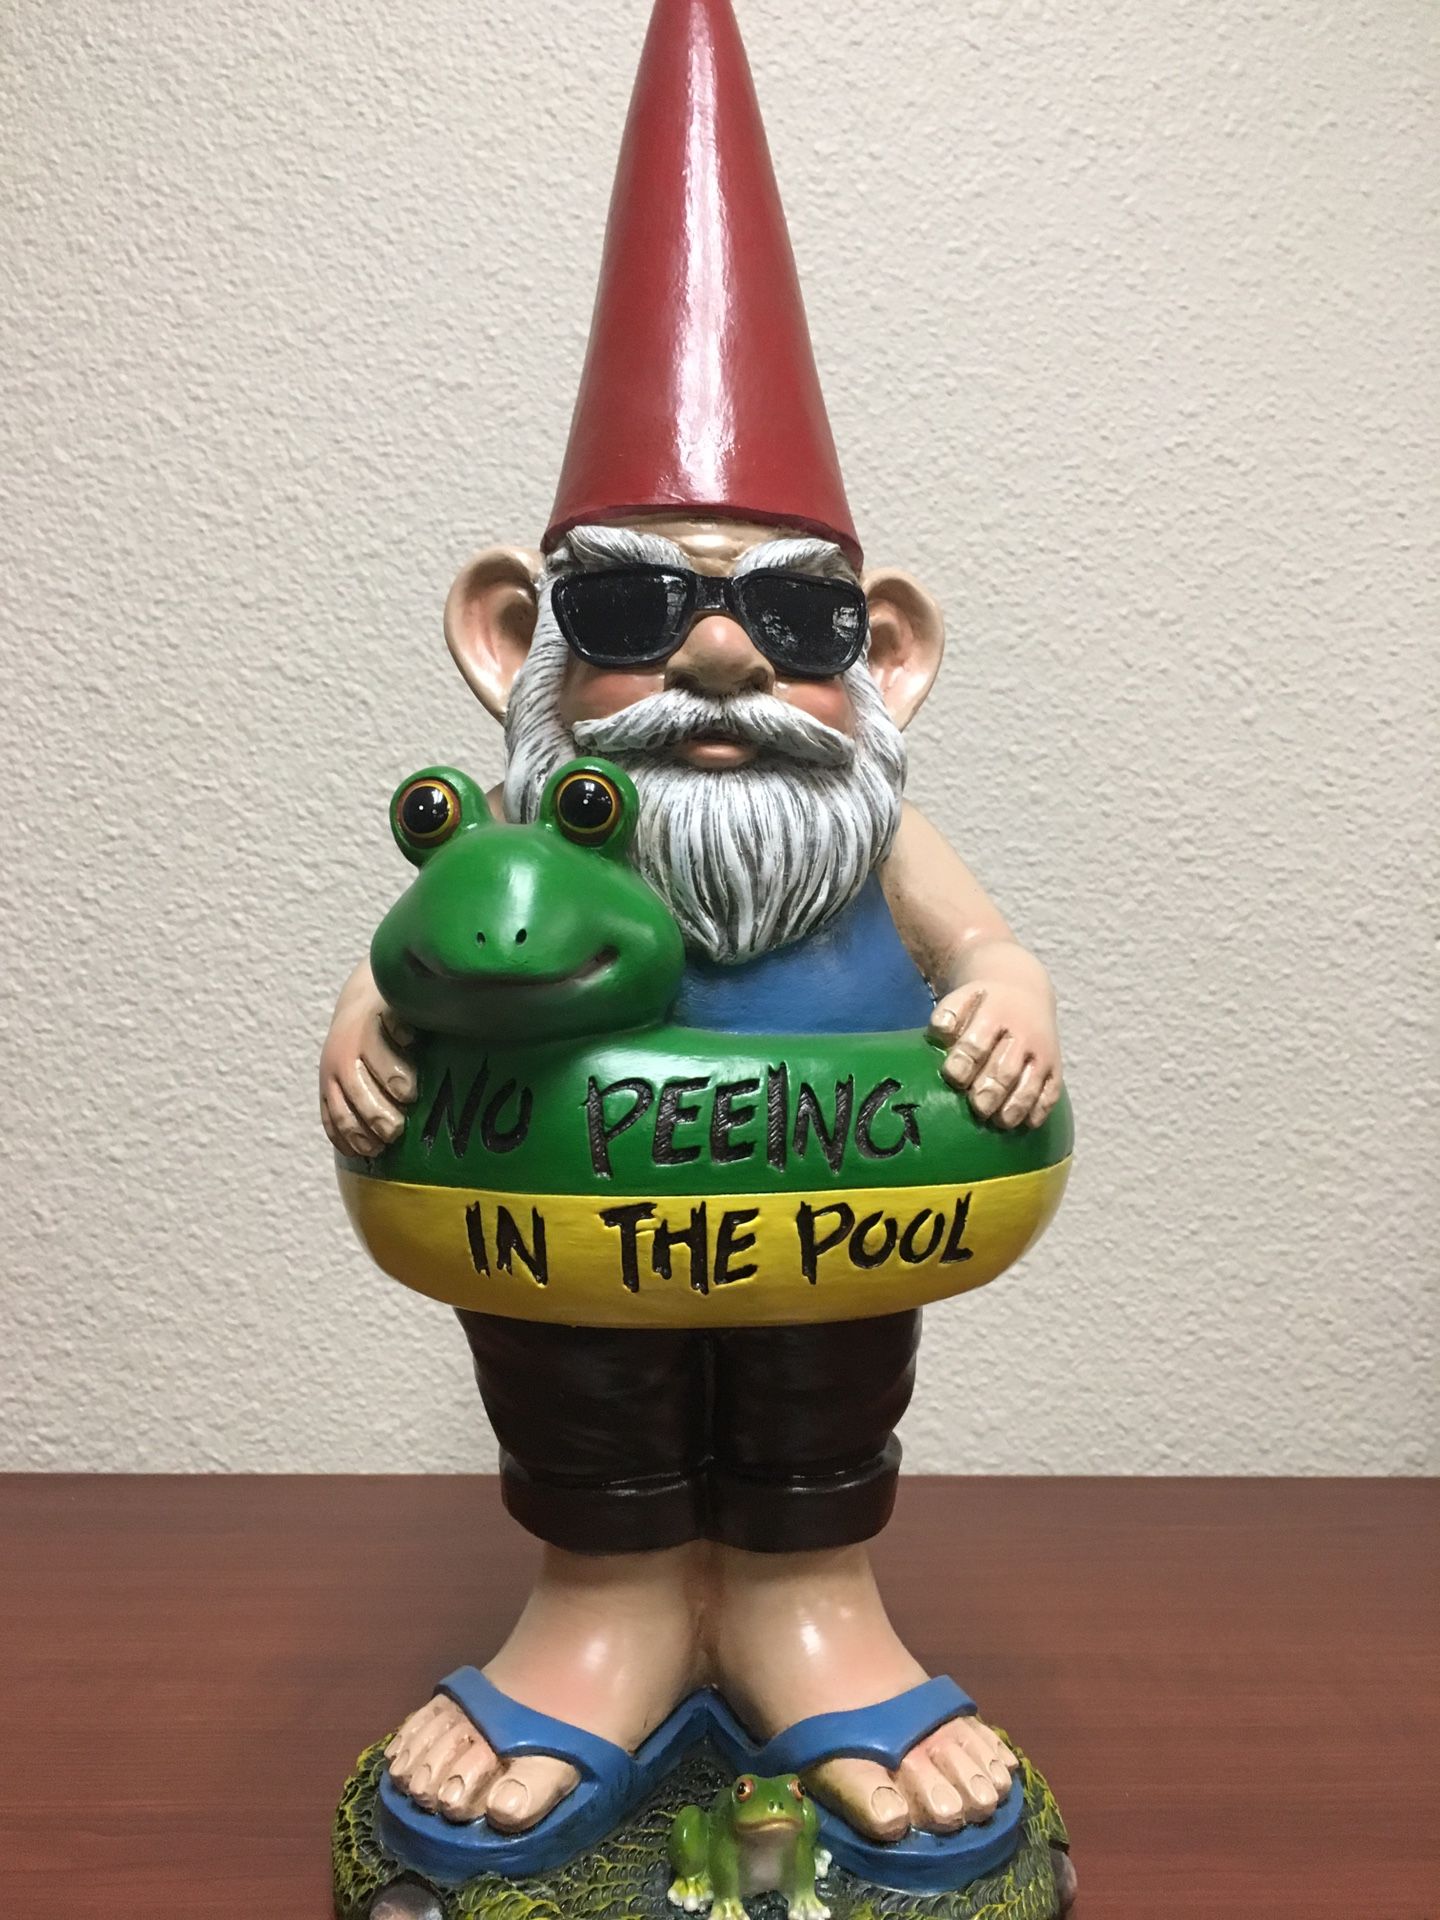 Garden gnome ( swimming pool 🏊 warring sign )No Peeing in the Pool